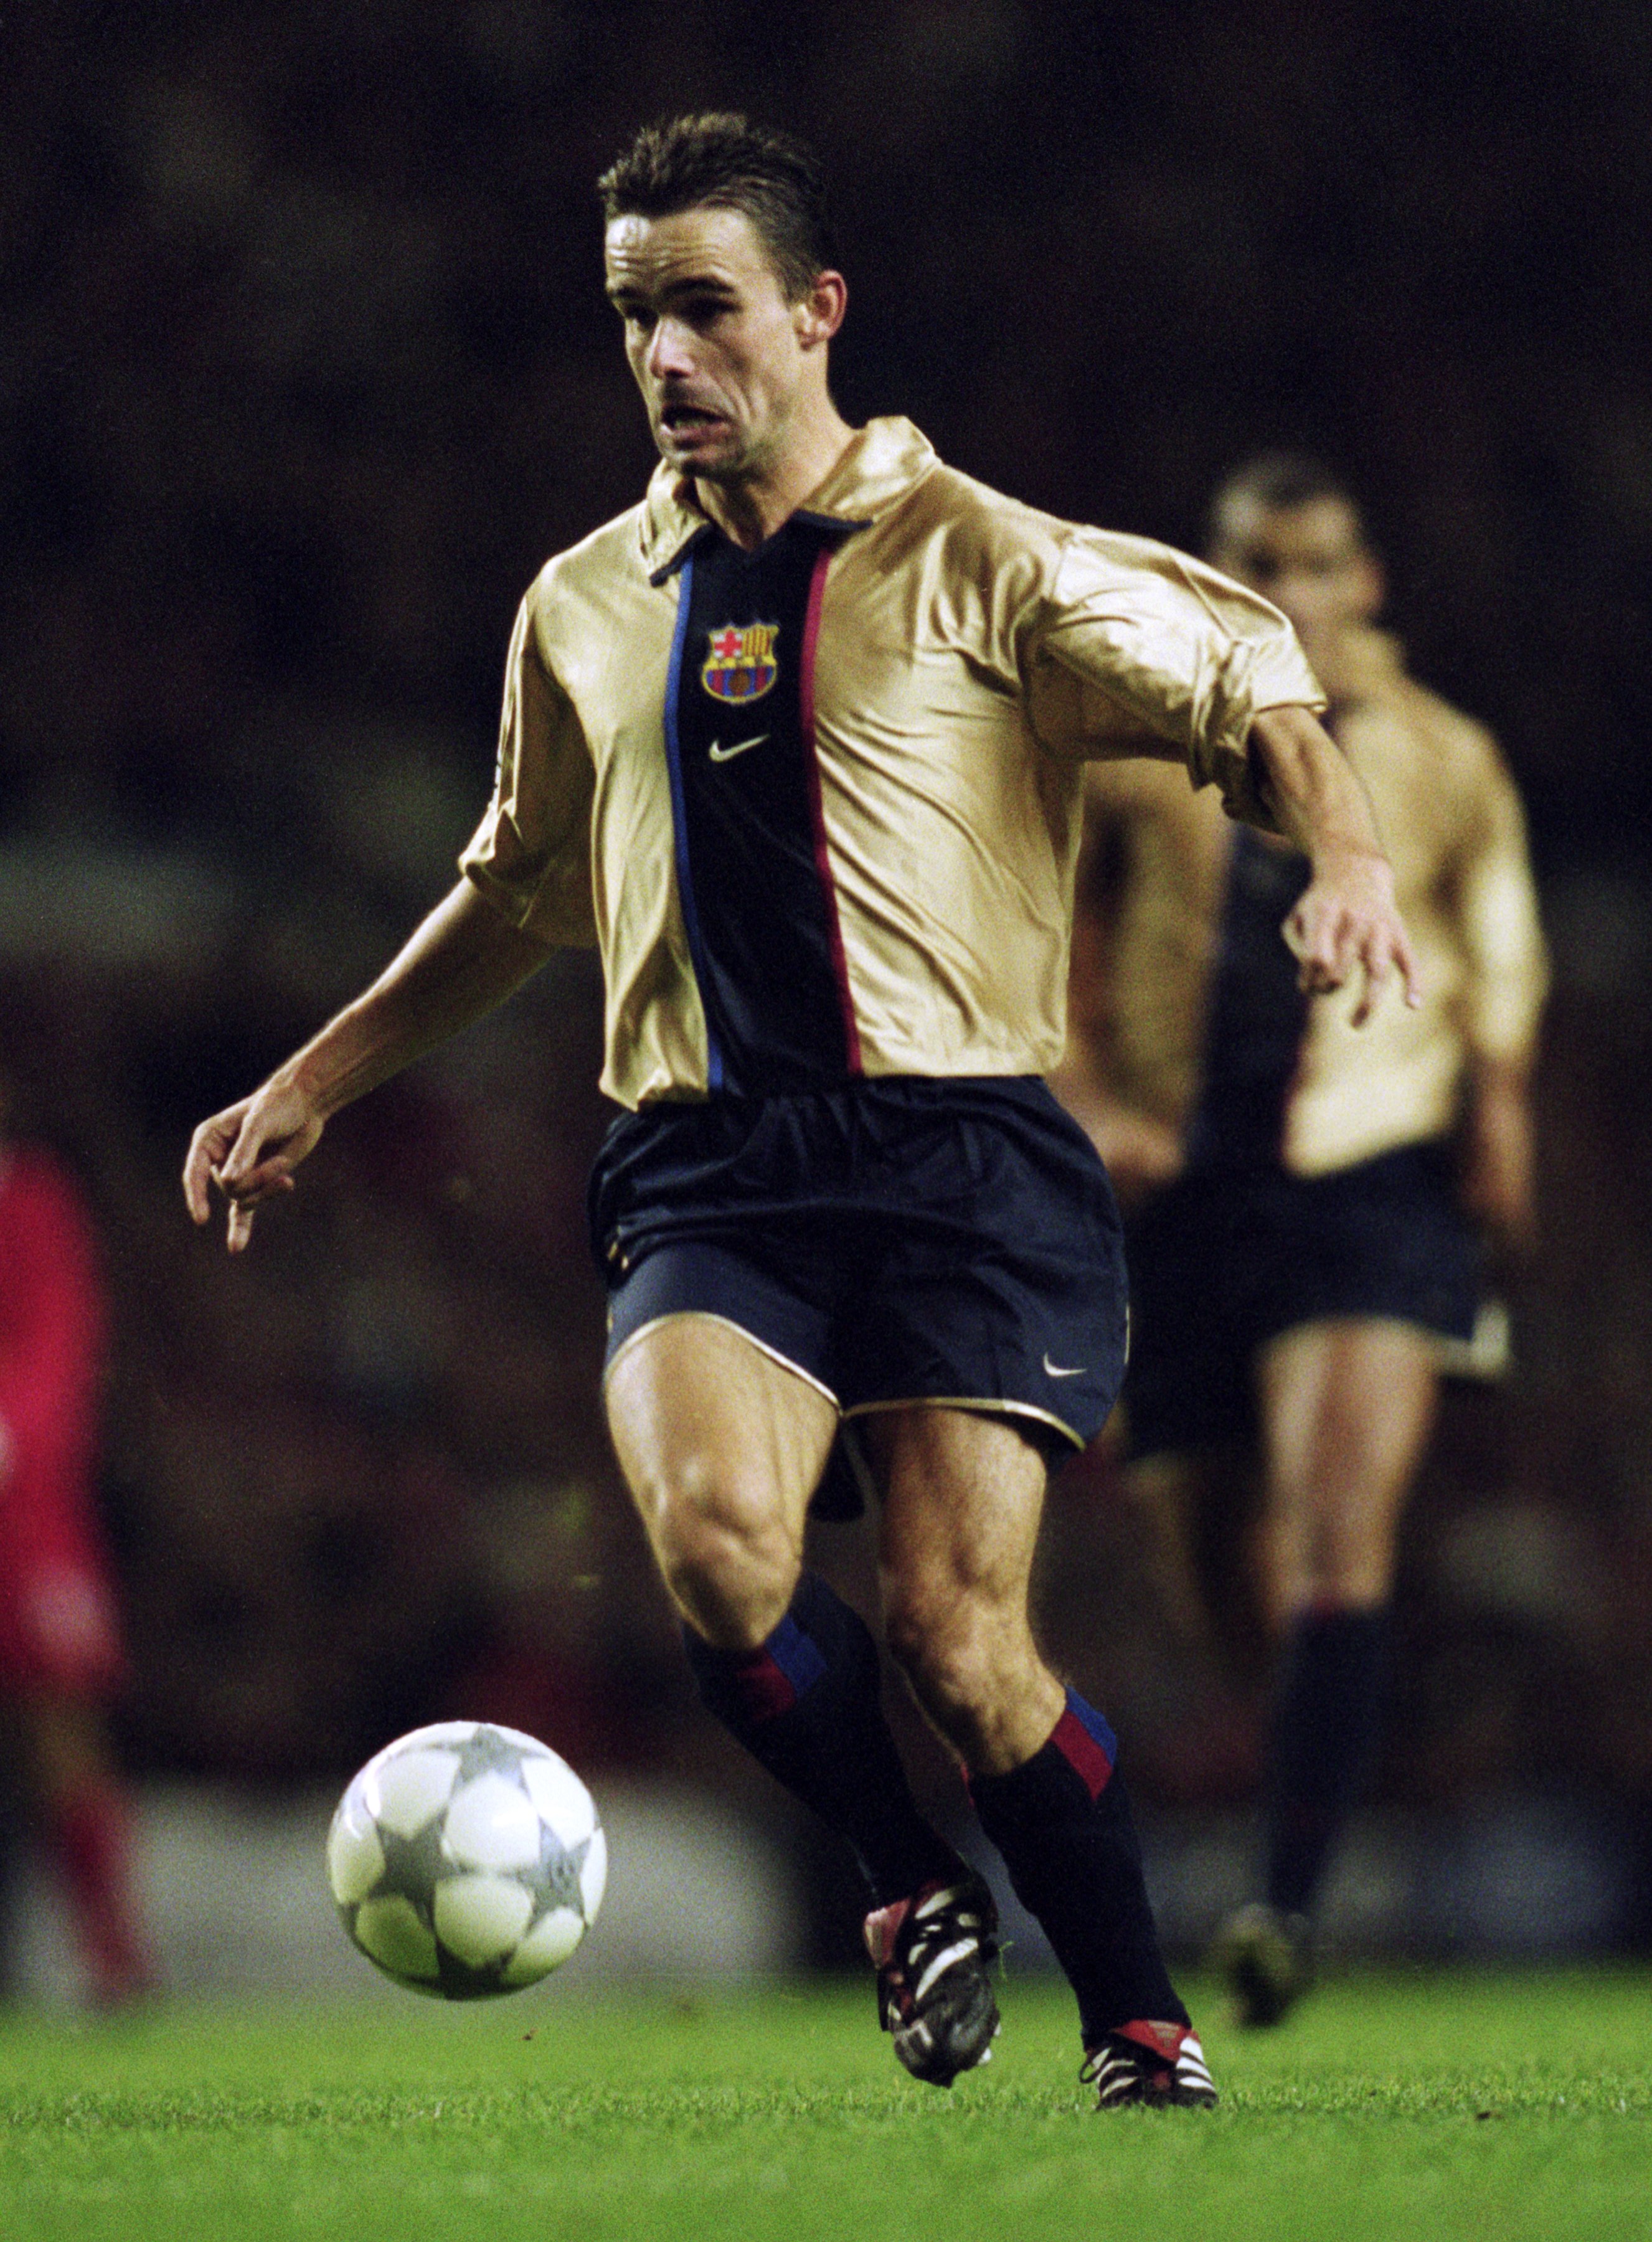 20 Nov 2001:  Marc Overmars of Barcelona runs with the ball during the UEFA Champions League Group B match against Liverpool played at Anfield, in Liverpool, England. Barcelona won the match 3-1. \ Mandatory Credit: Gary M Prior /Allsport